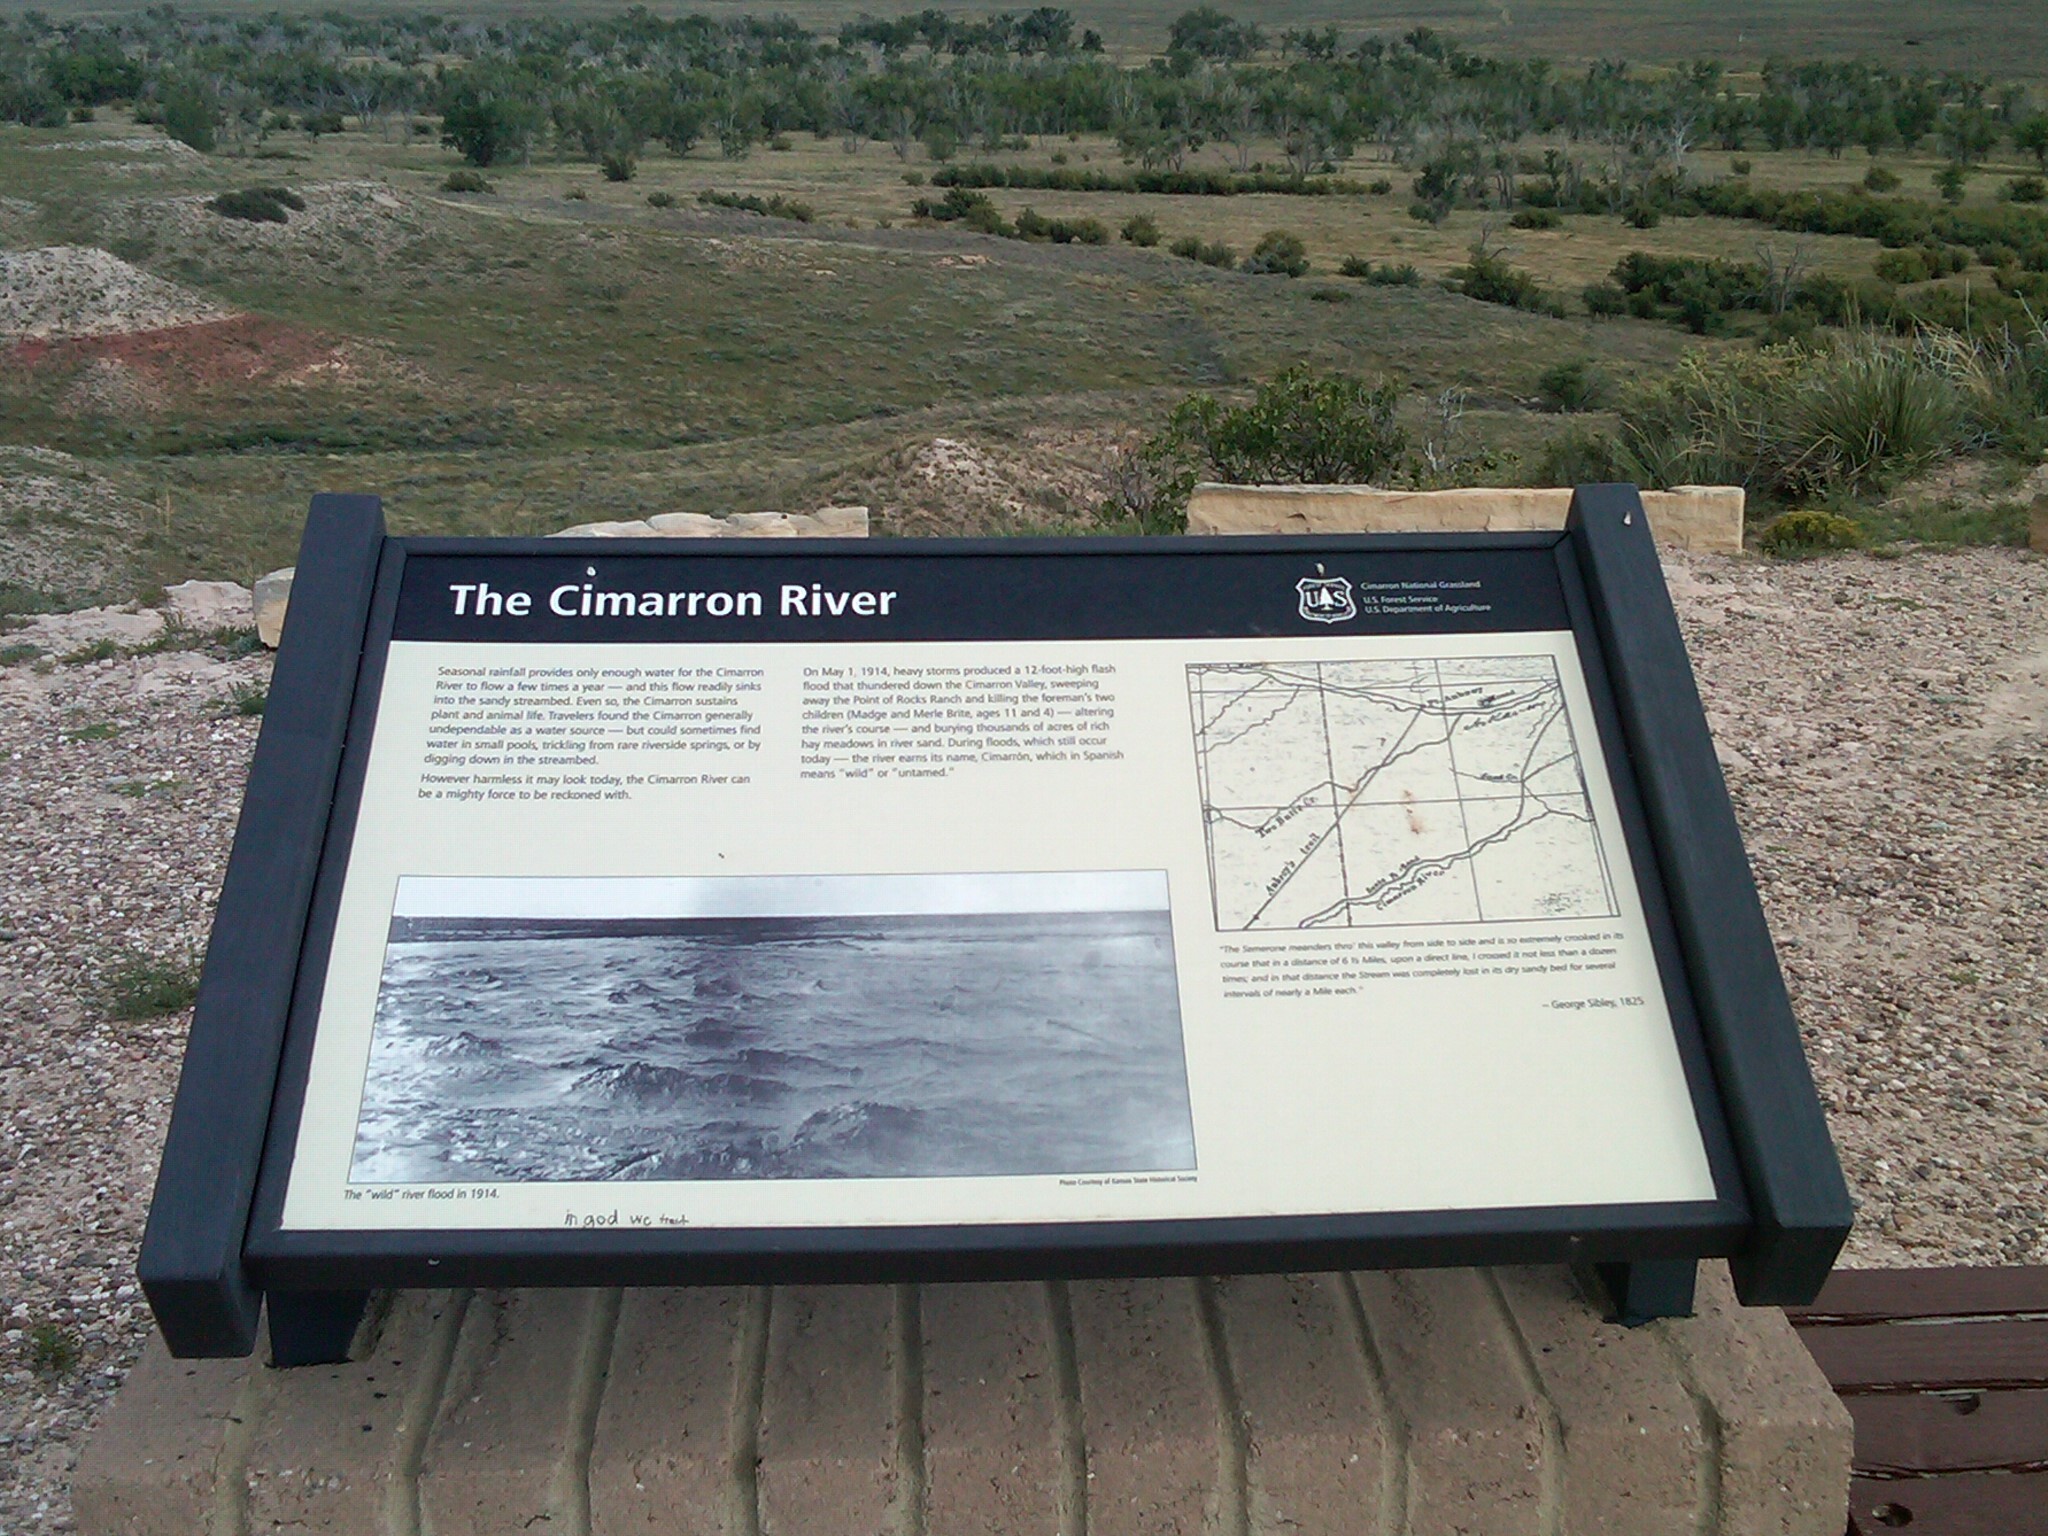 "Cimarron River" wayside with a view at Cimarron National Grassland